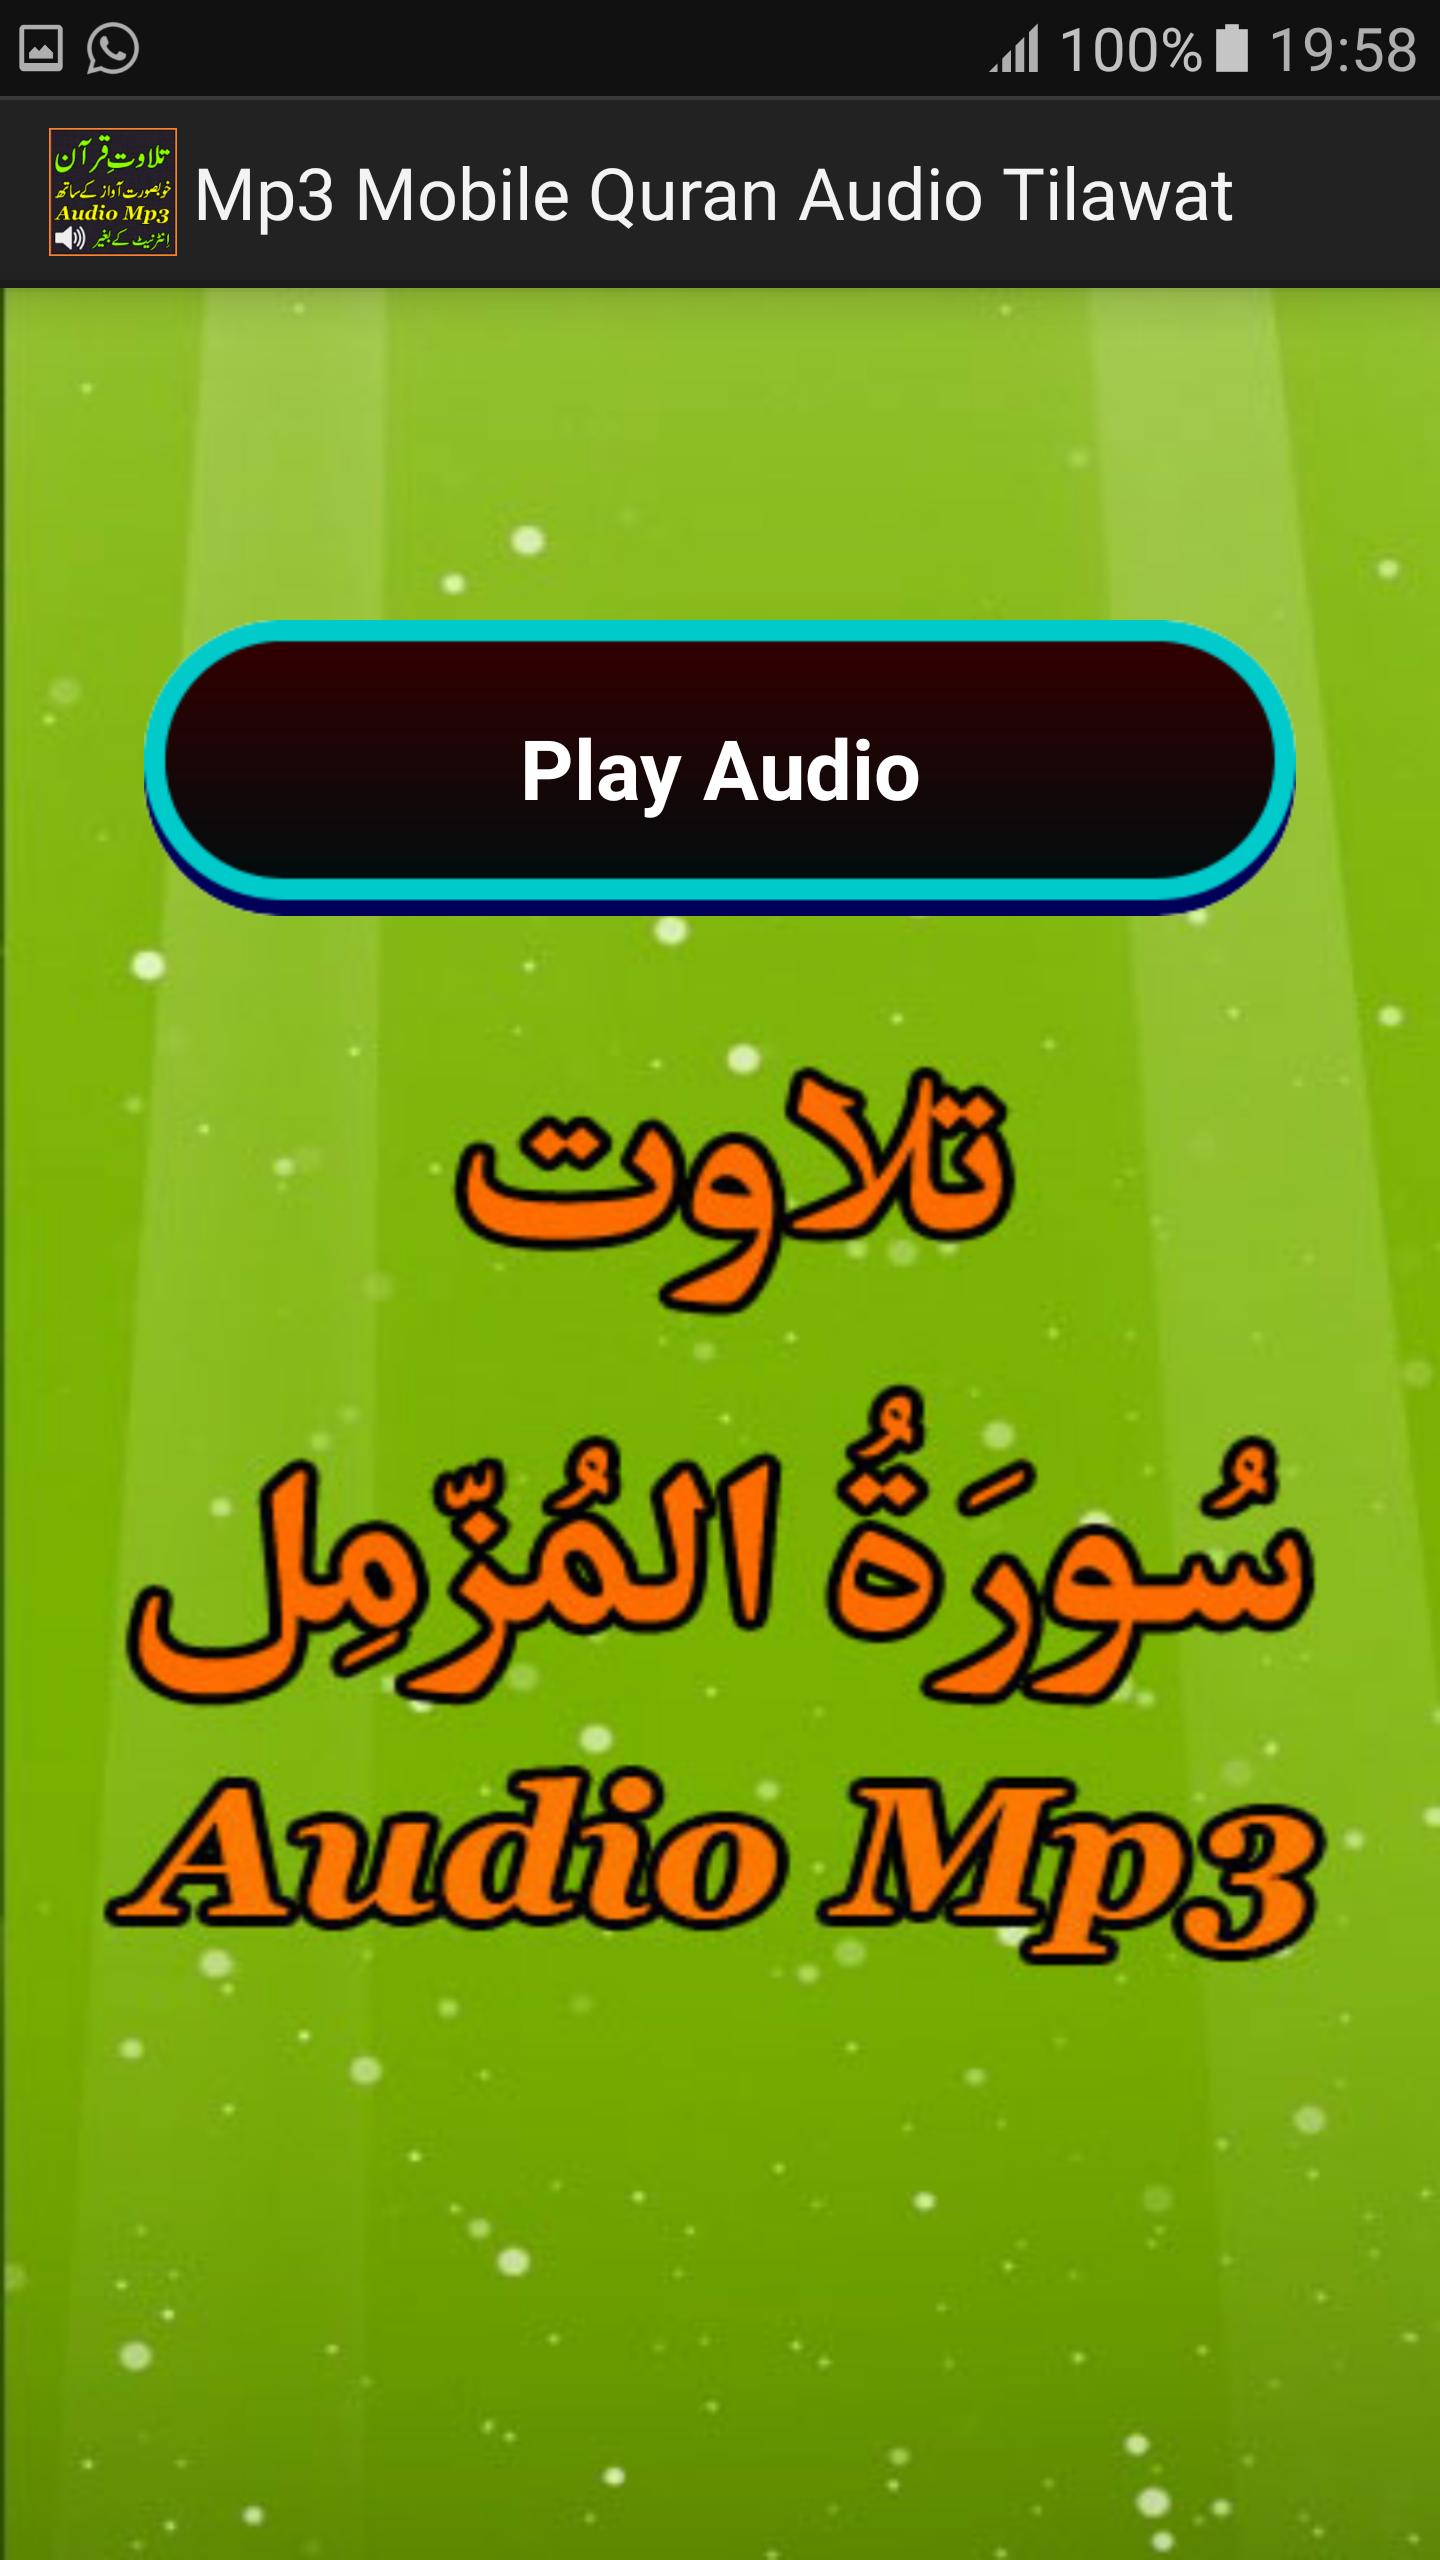 Mp3 Mobile Quran Audio App for Android - APK Download